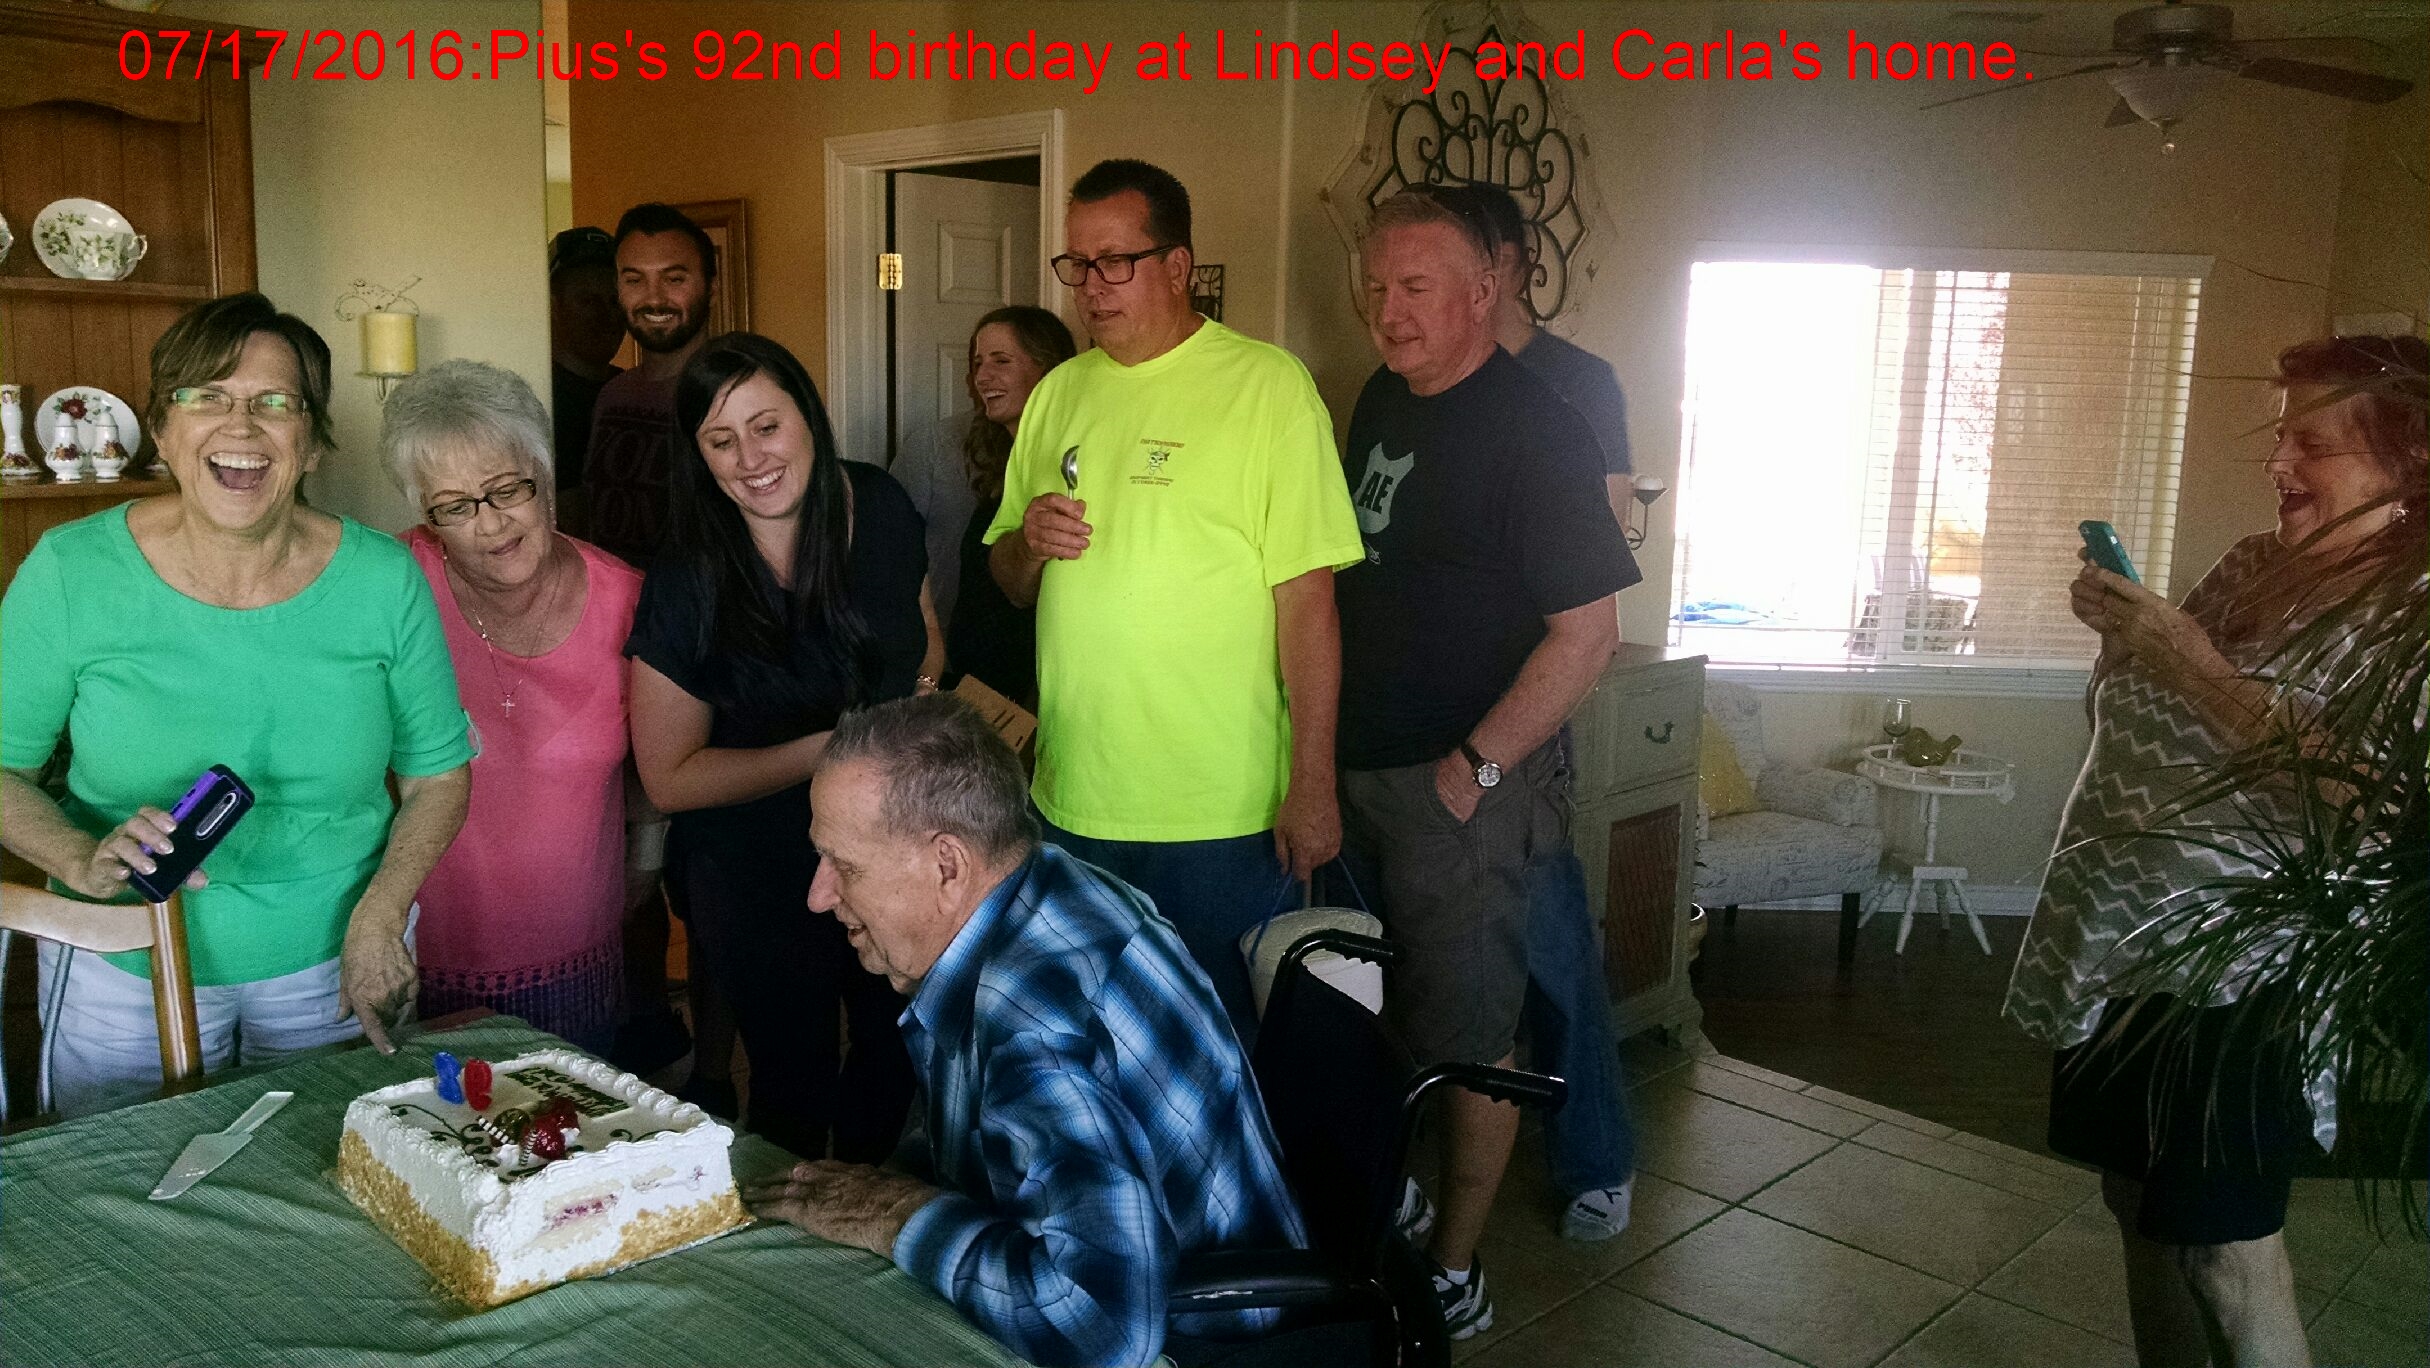 Pius's 92nd Birthday at Lindsey and Carla's home, July 17, 2016.